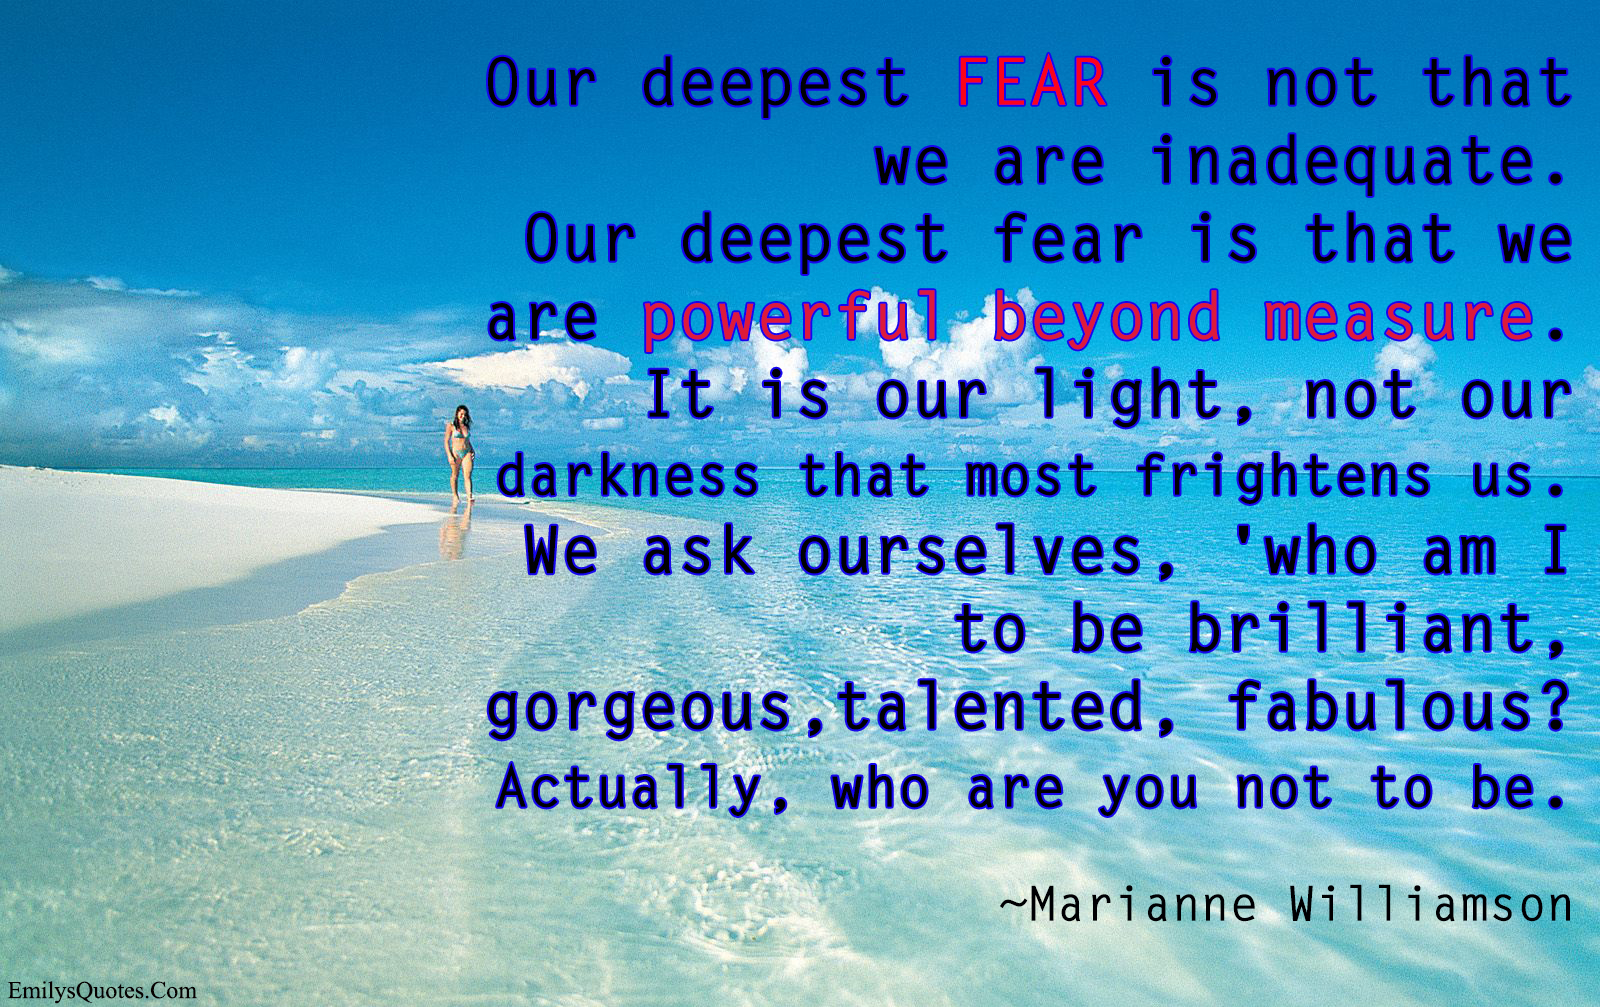 Our deepest fear is not that we are inadequate. Our deepest fear is